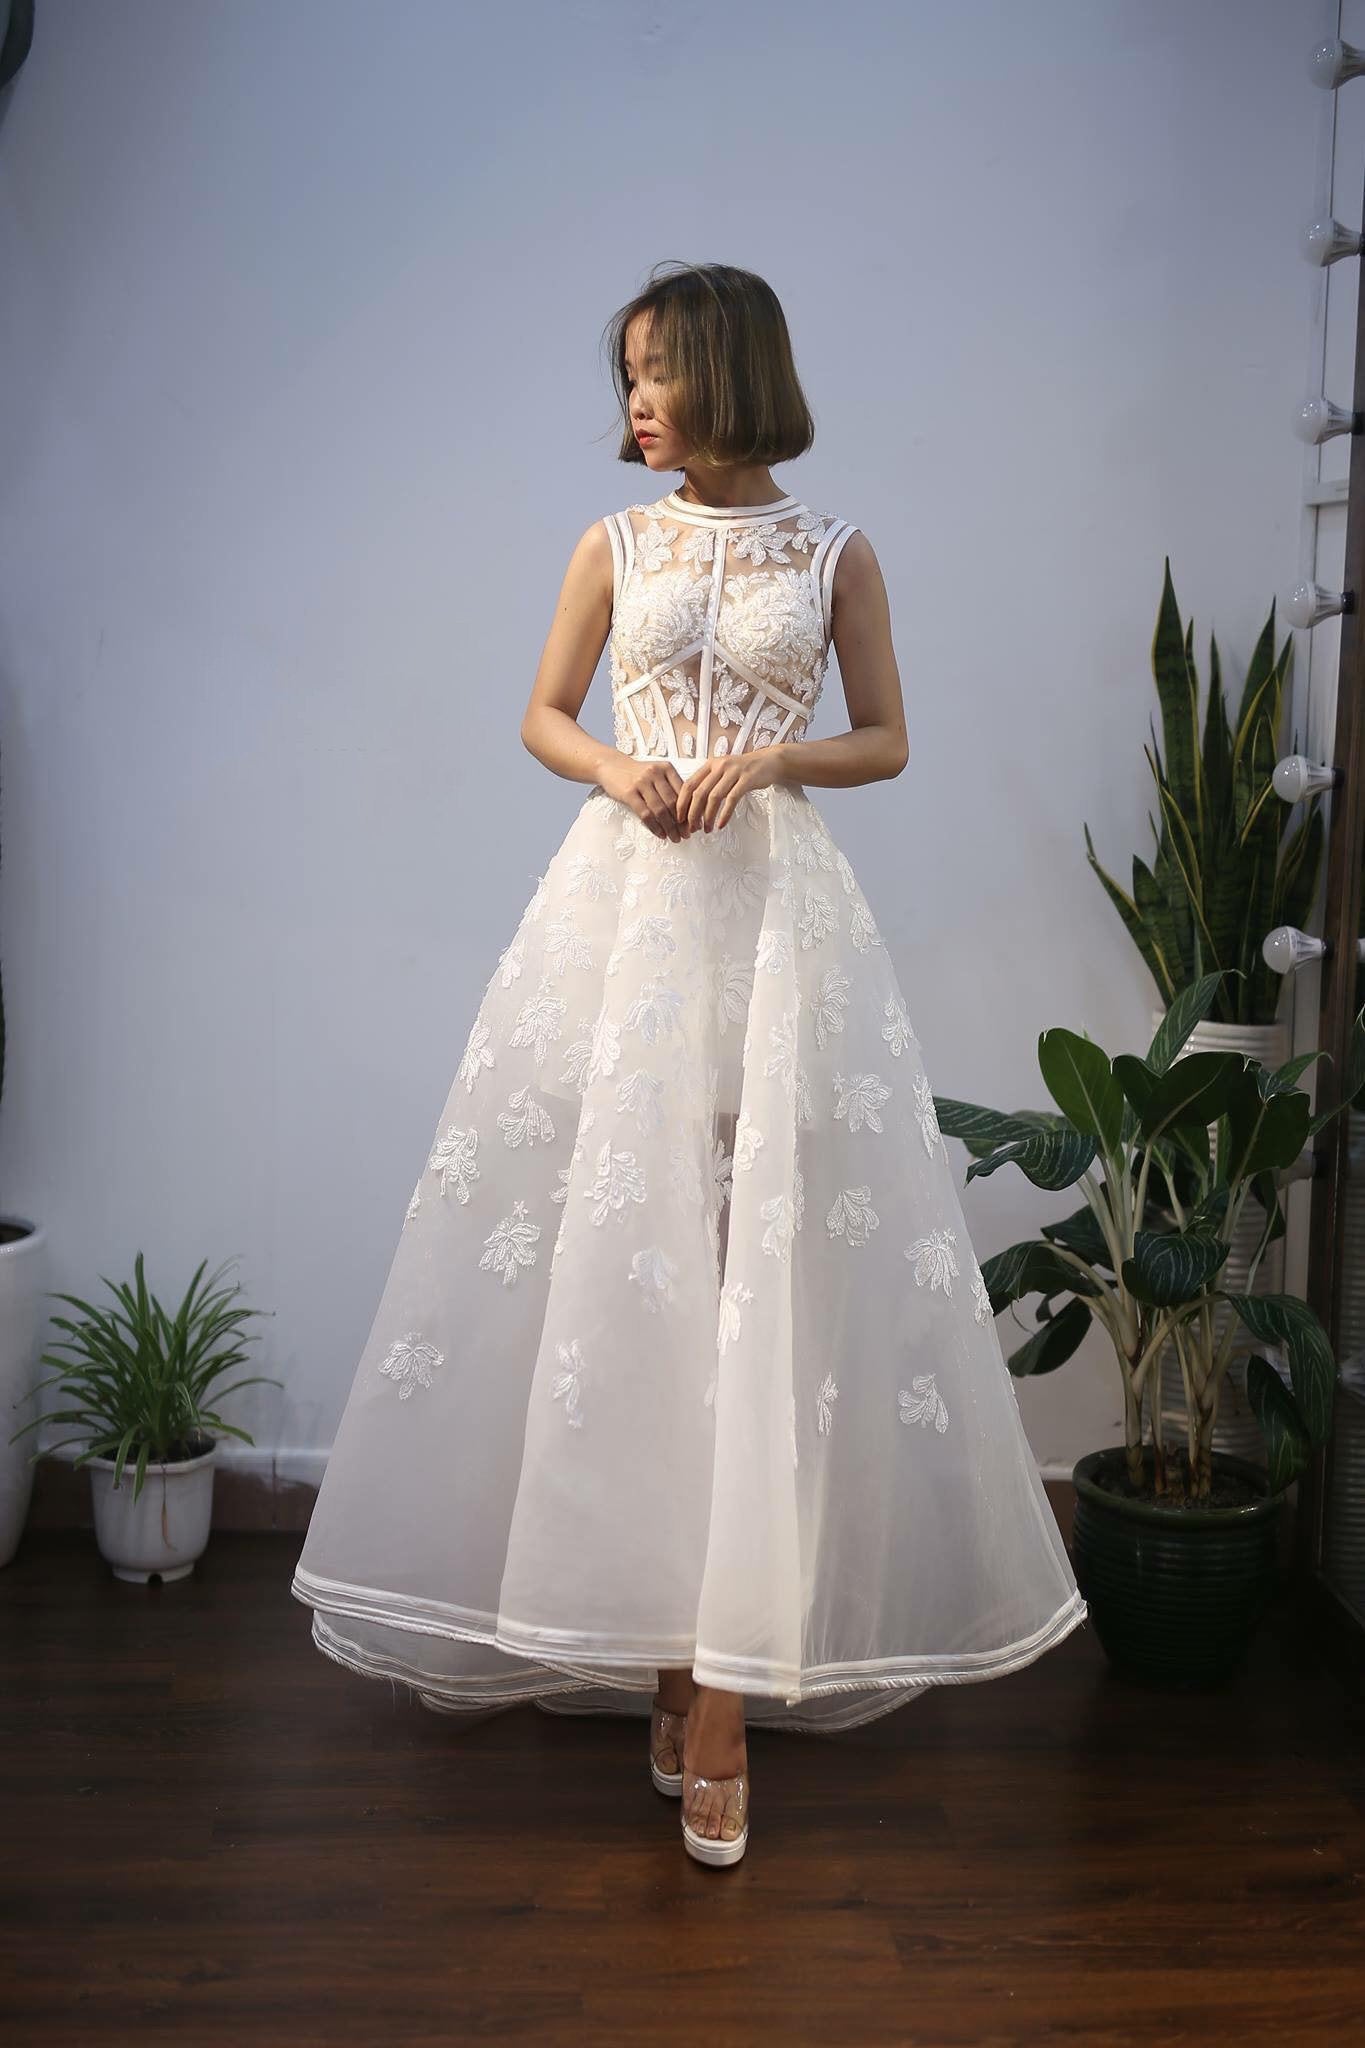 Ankle length highlow sleeveless white floral lace wedding